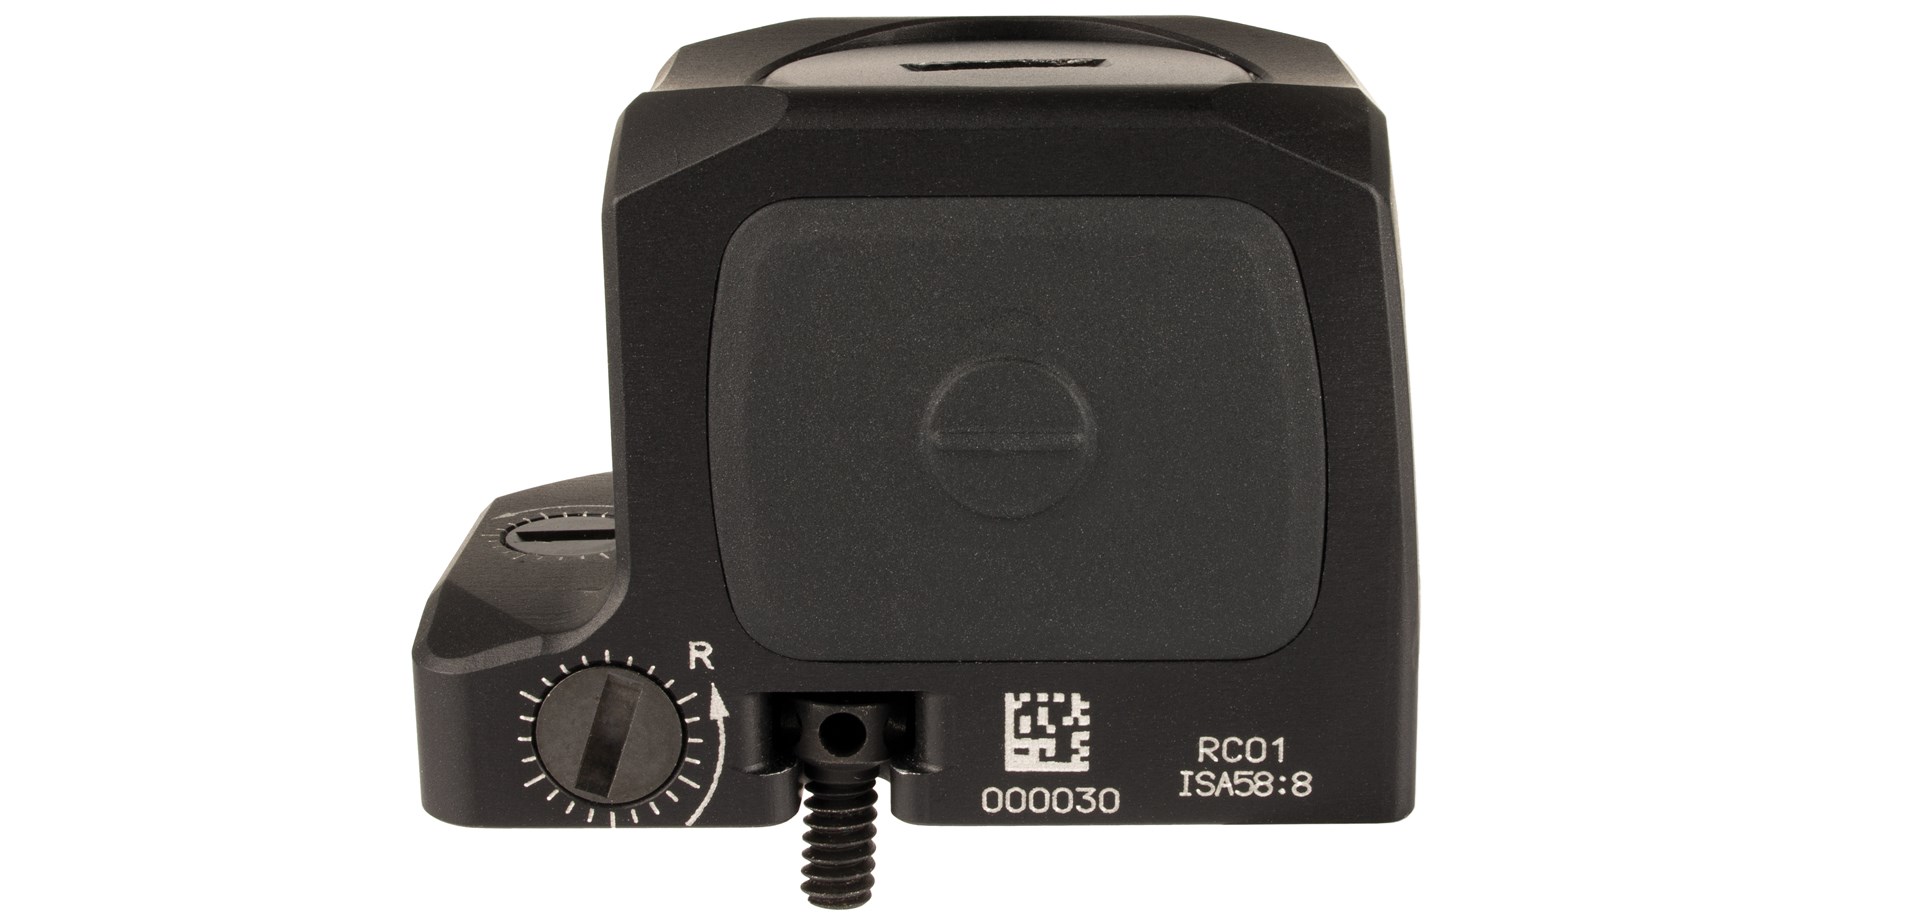 Right-side view Trijicon RCR closed-emitter optic red-dot black square housing button dial screw